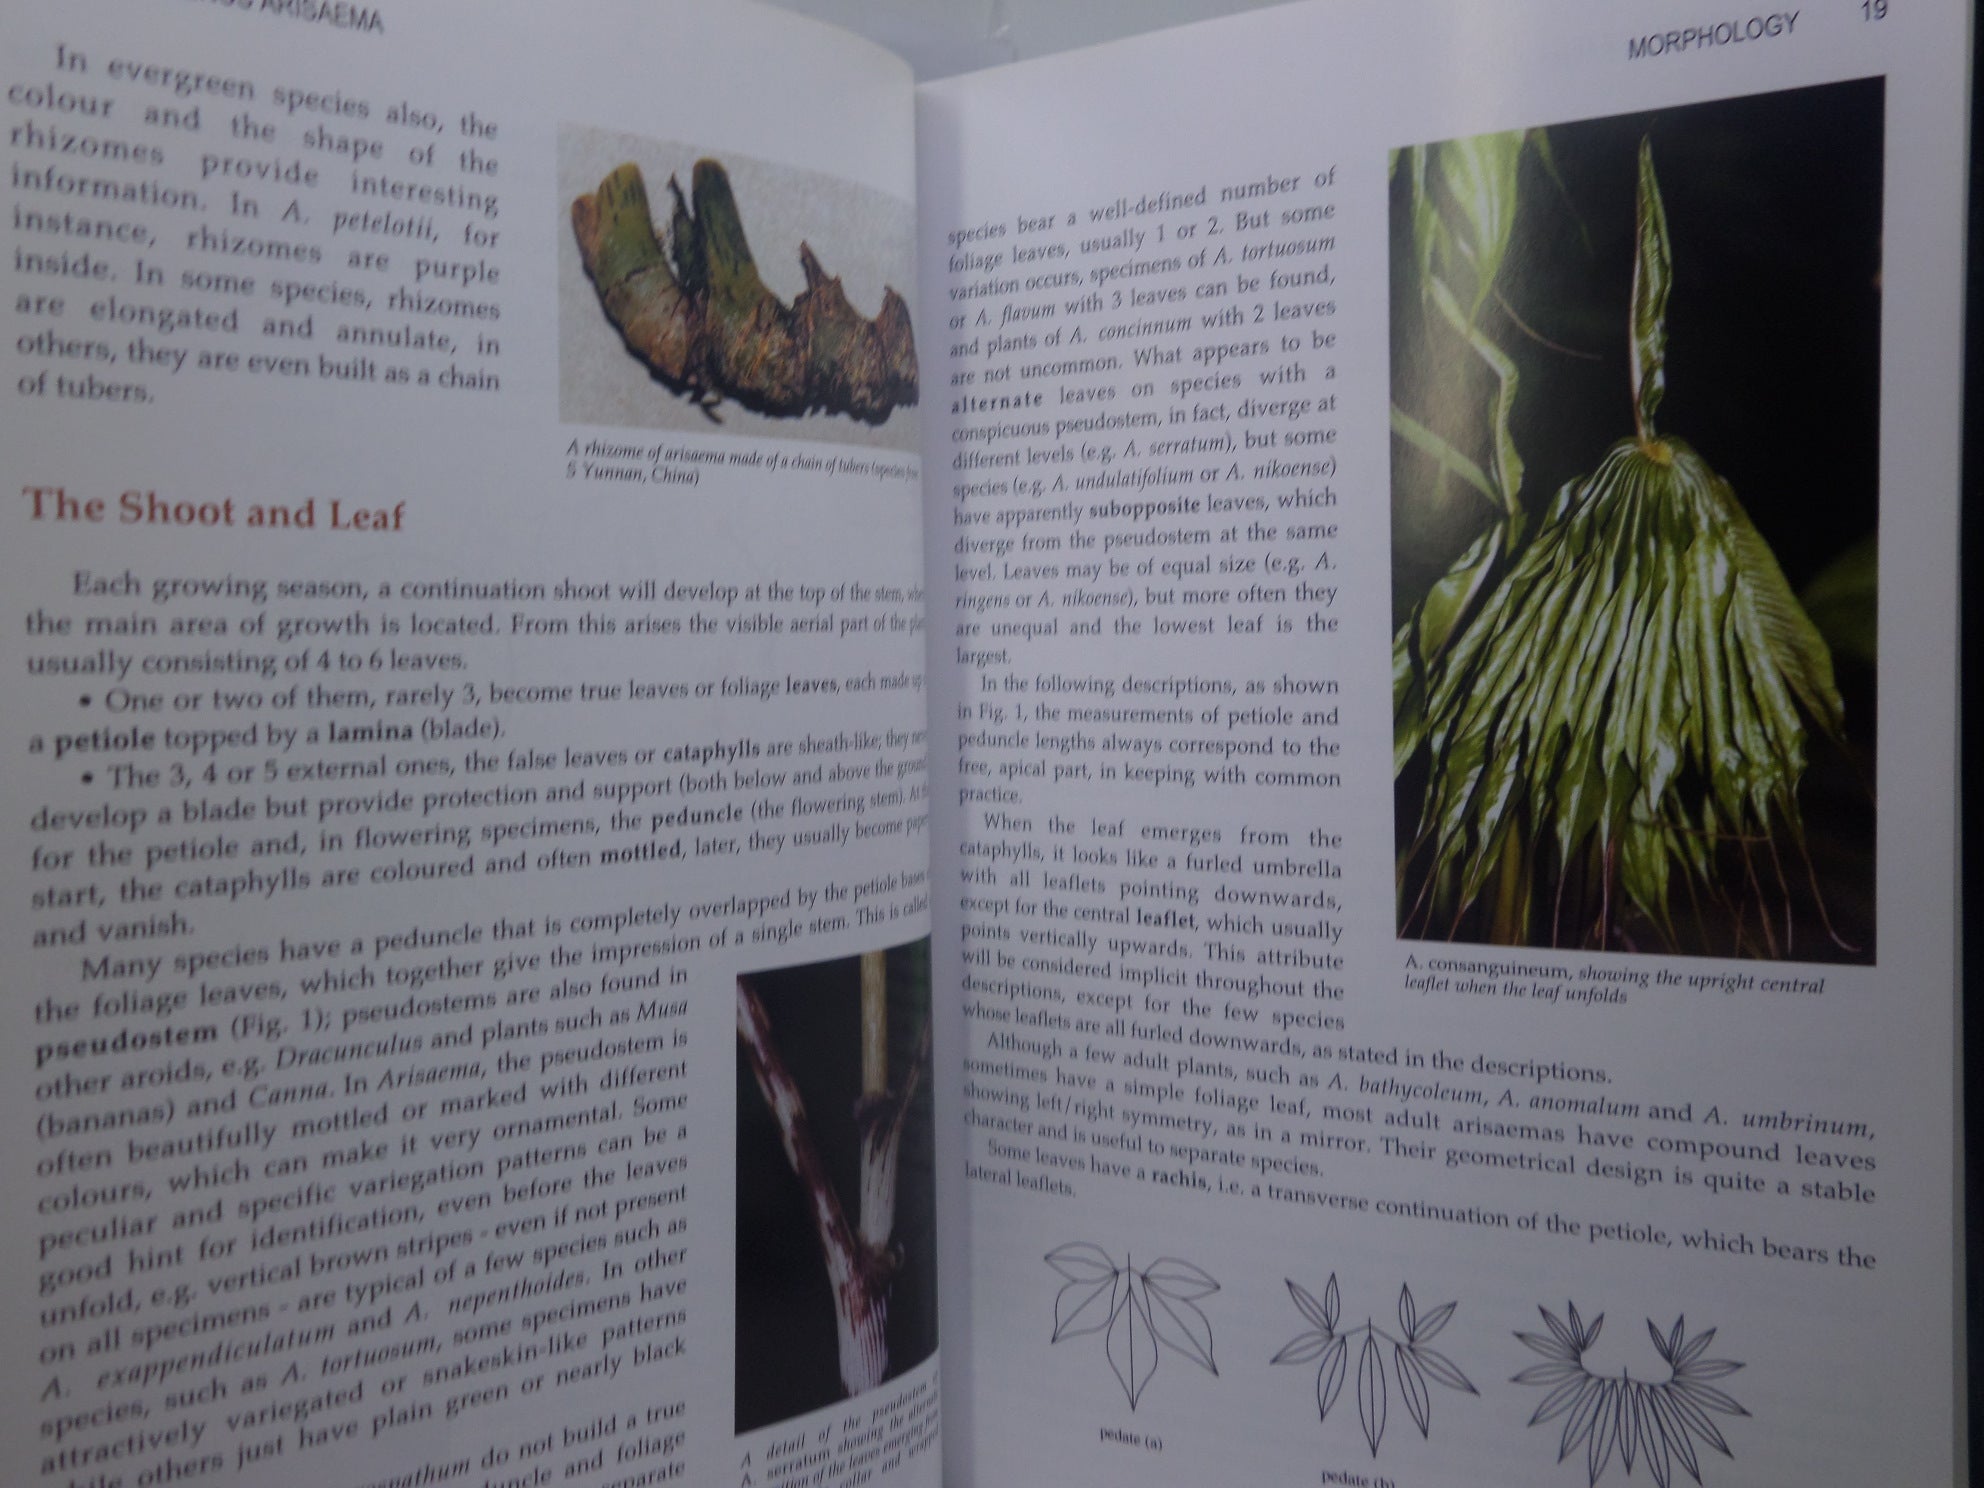 THE GENUS ARISAEMA: A MONOGRAPH FOR BOTANISTS AND NATURE LOVERS BY GUY GUSMAN 2006